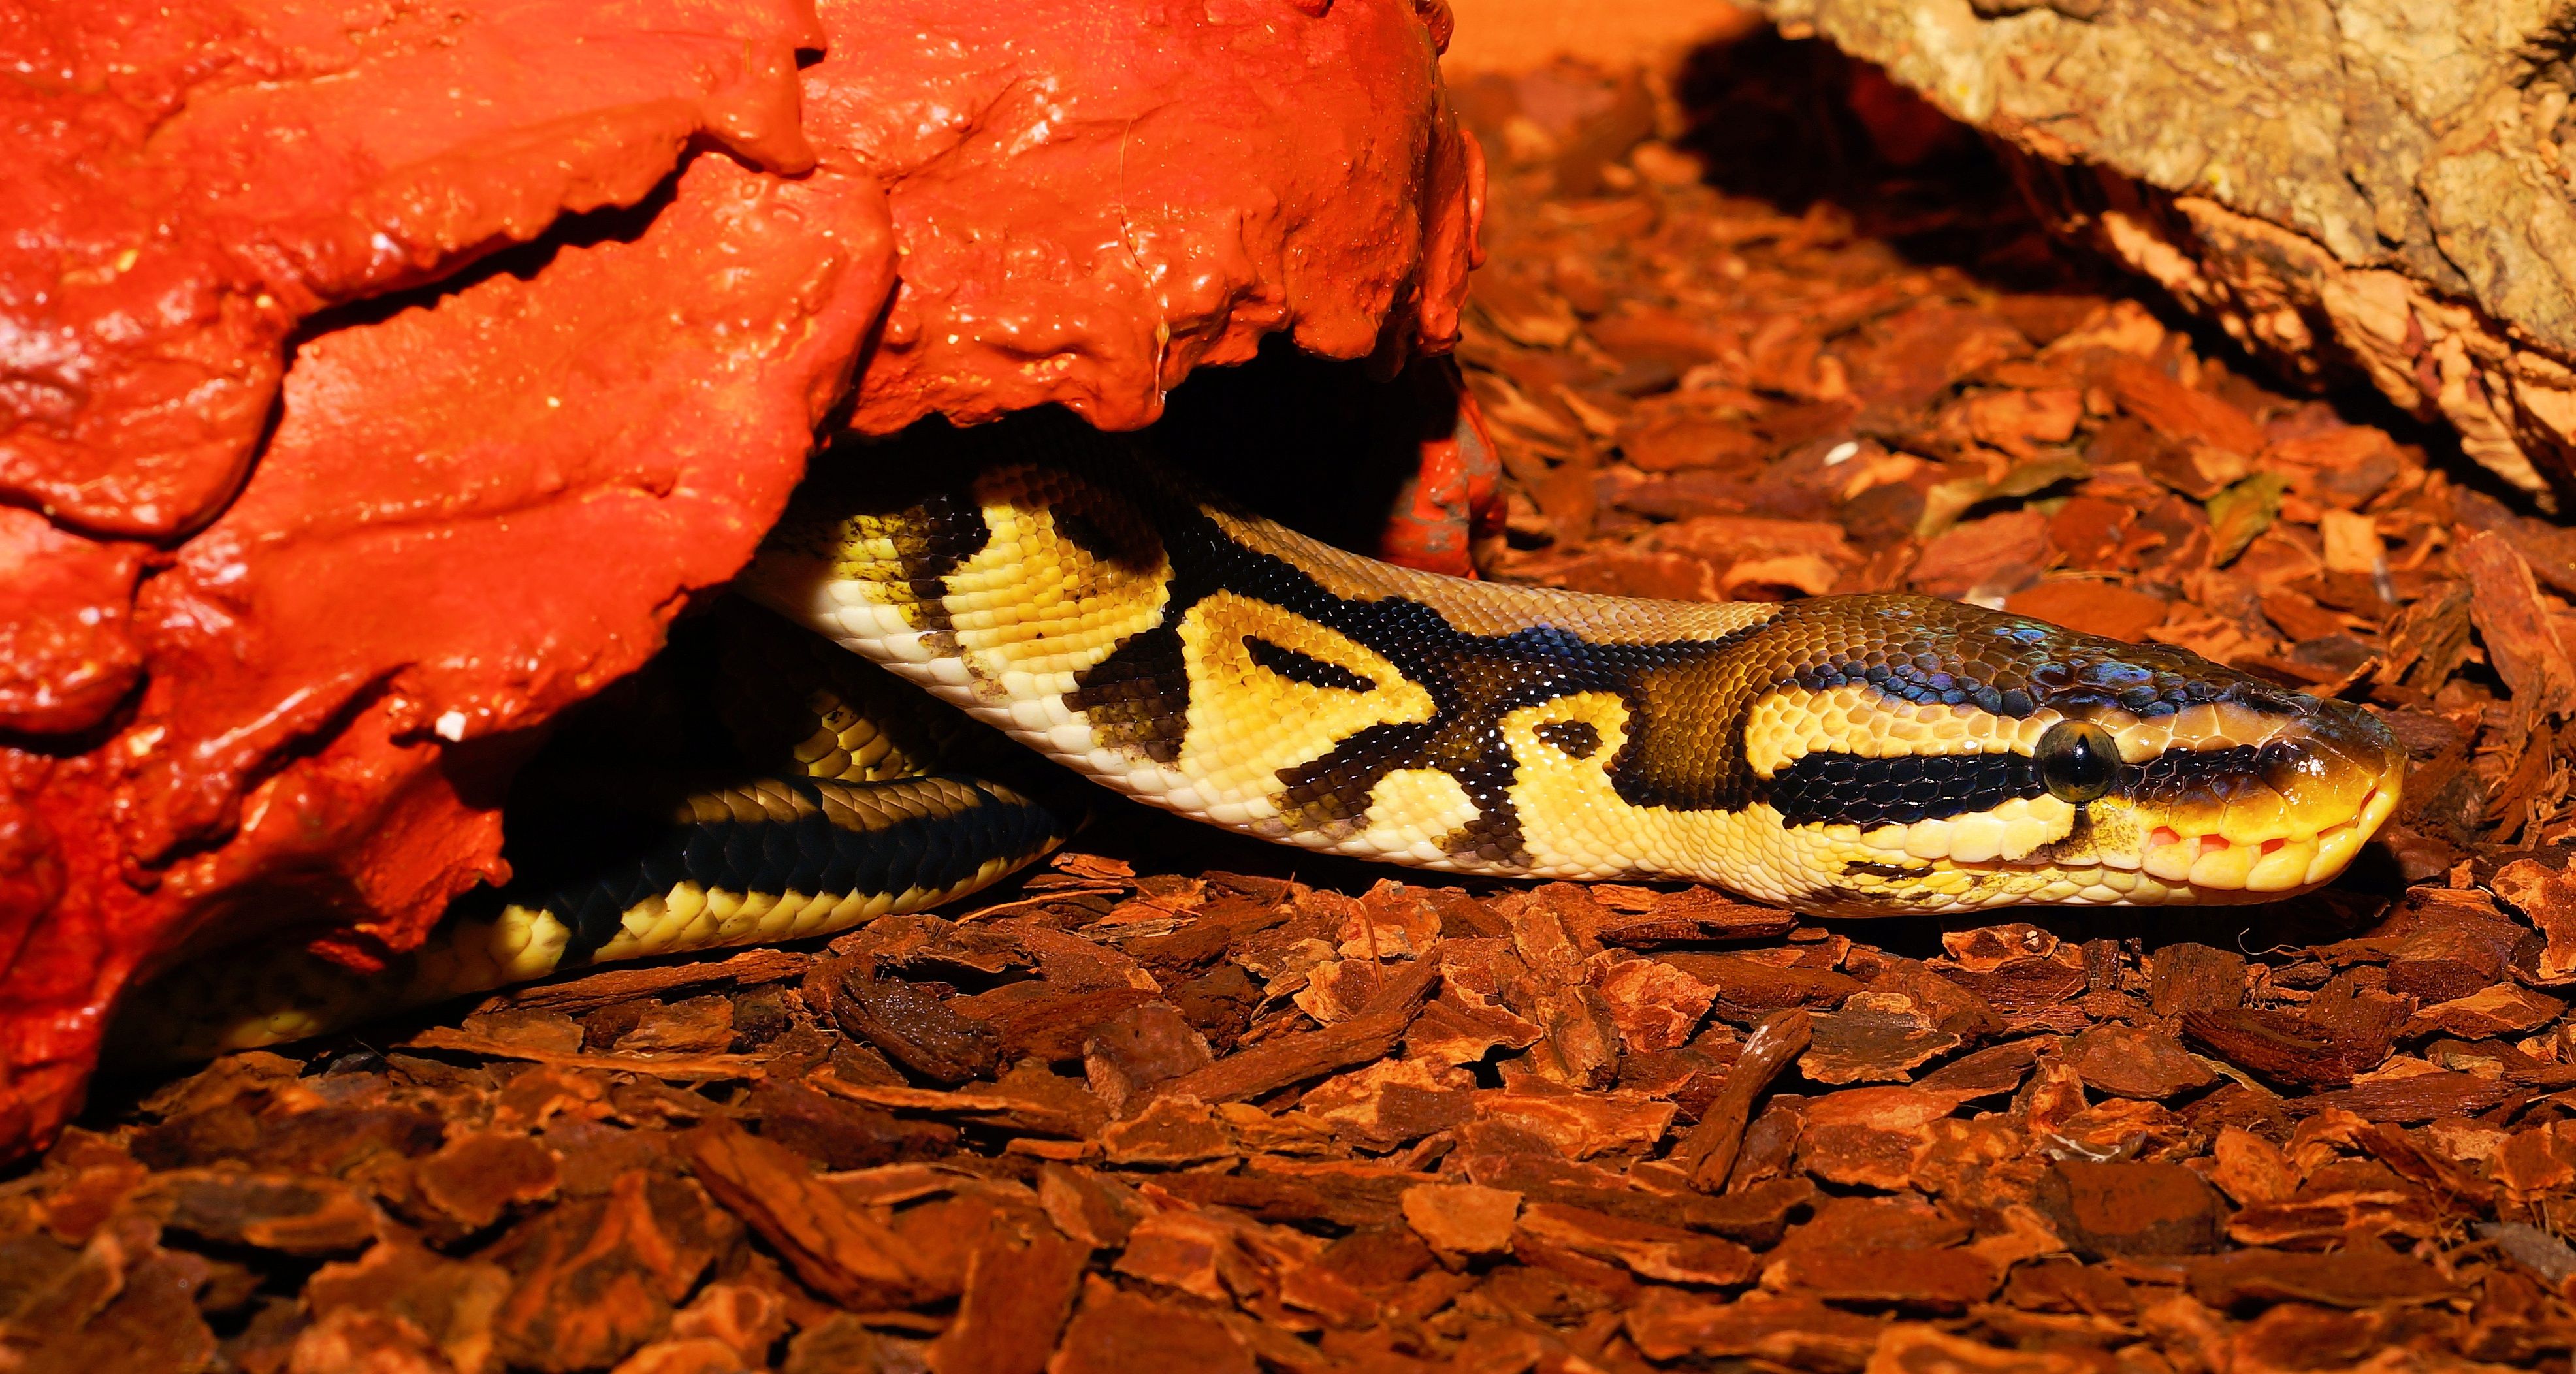 Ball Python, also known as the Royal Python Full HD Wallpaper